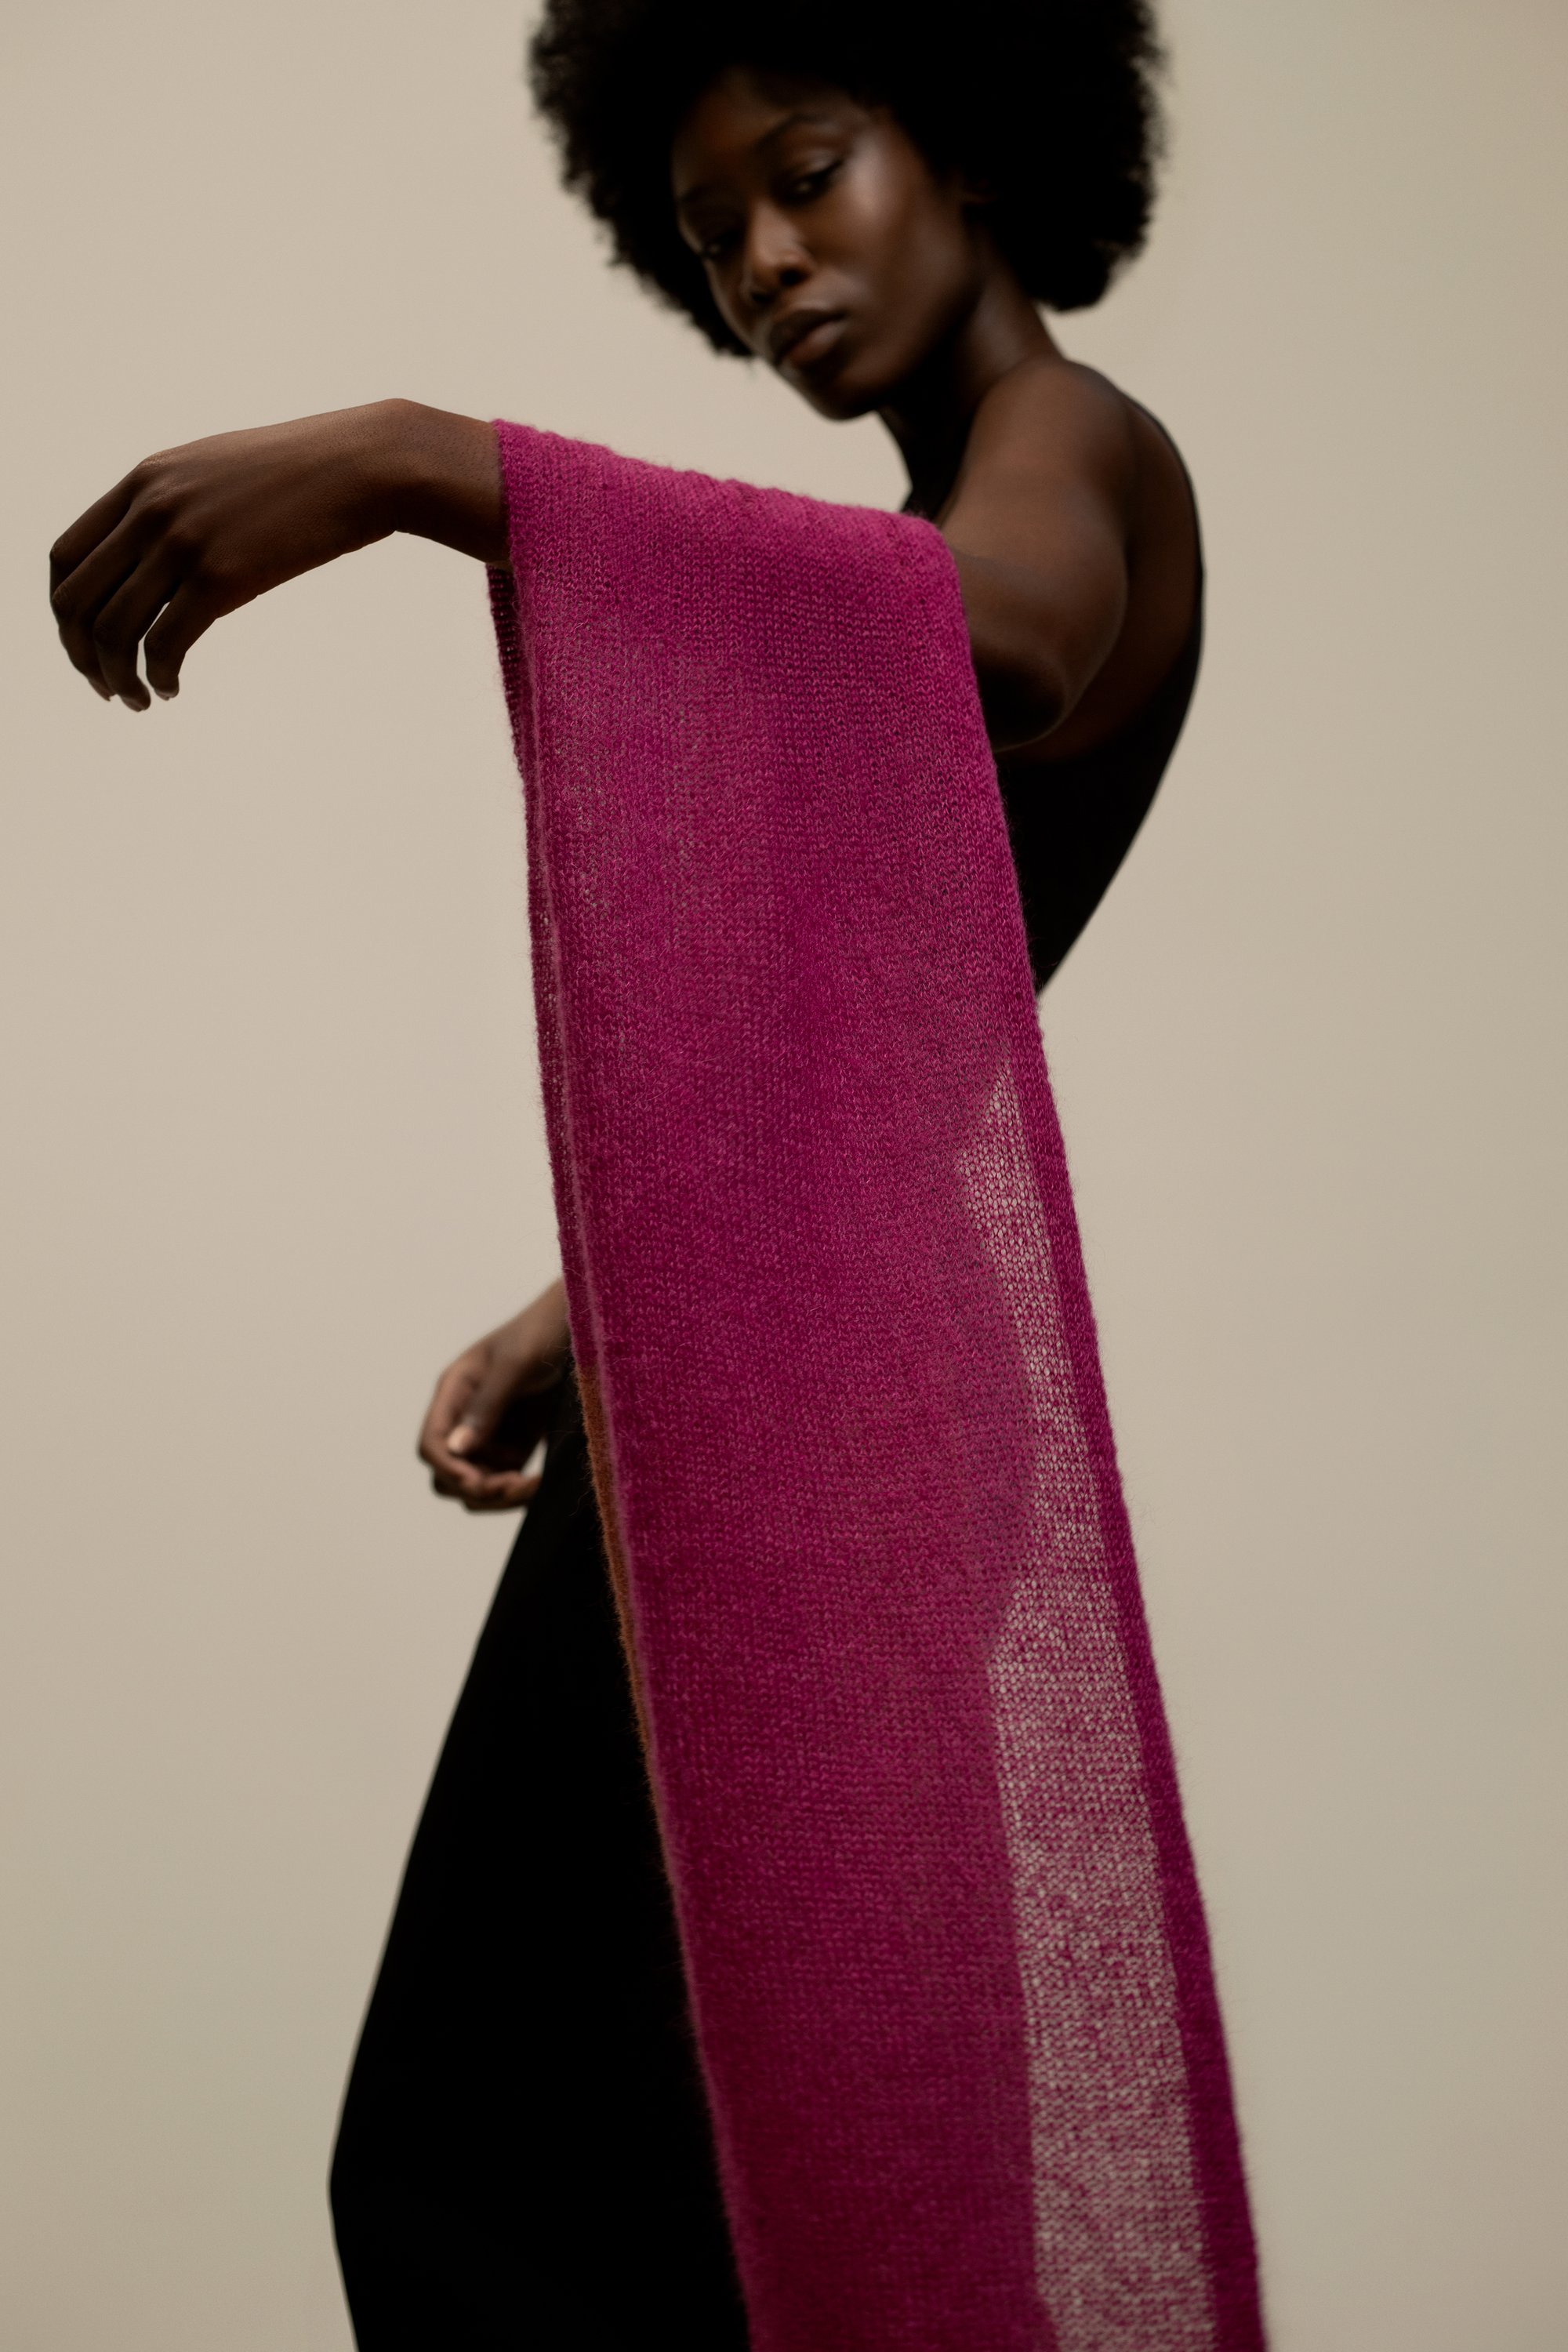 Image of Shaby Scarf in Rose.